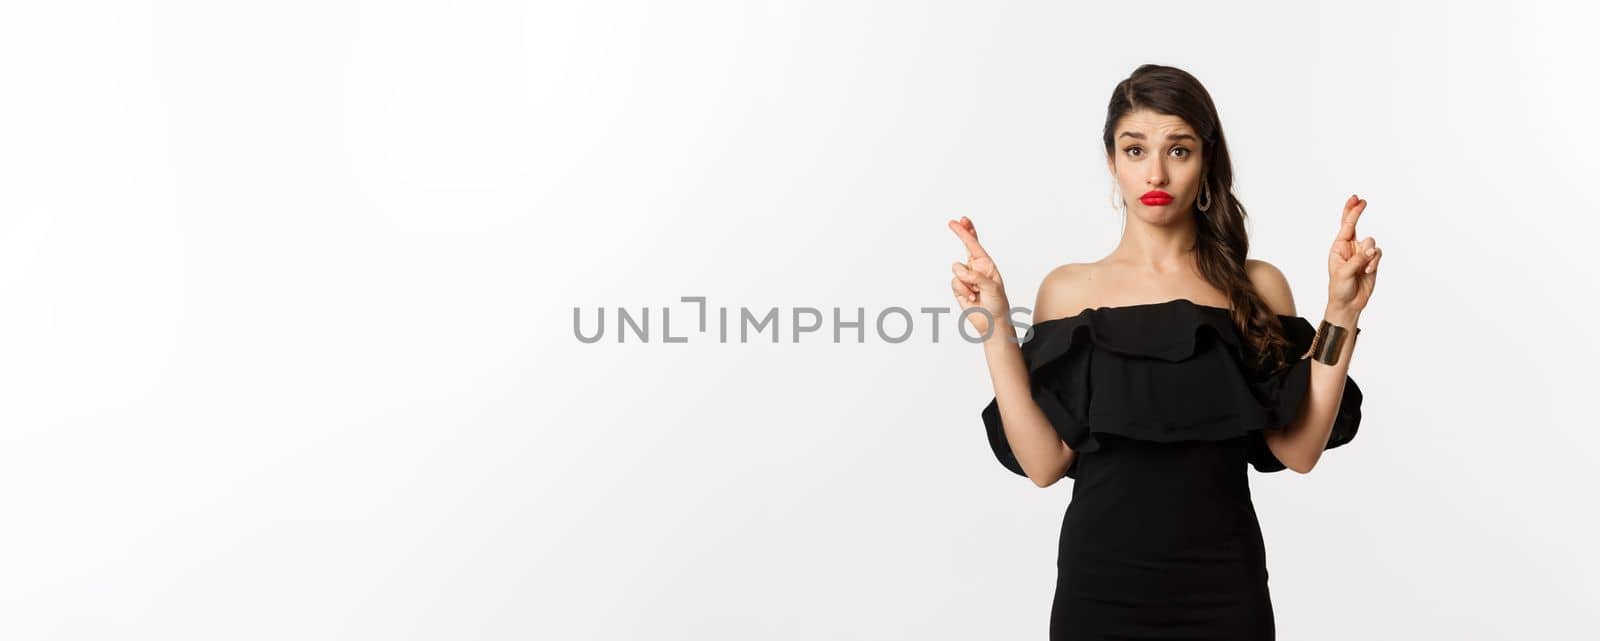 Fashion and beauty. Hopeful silly woman in black dress making wish, holding fingers crossed for good luck, standing over white background.